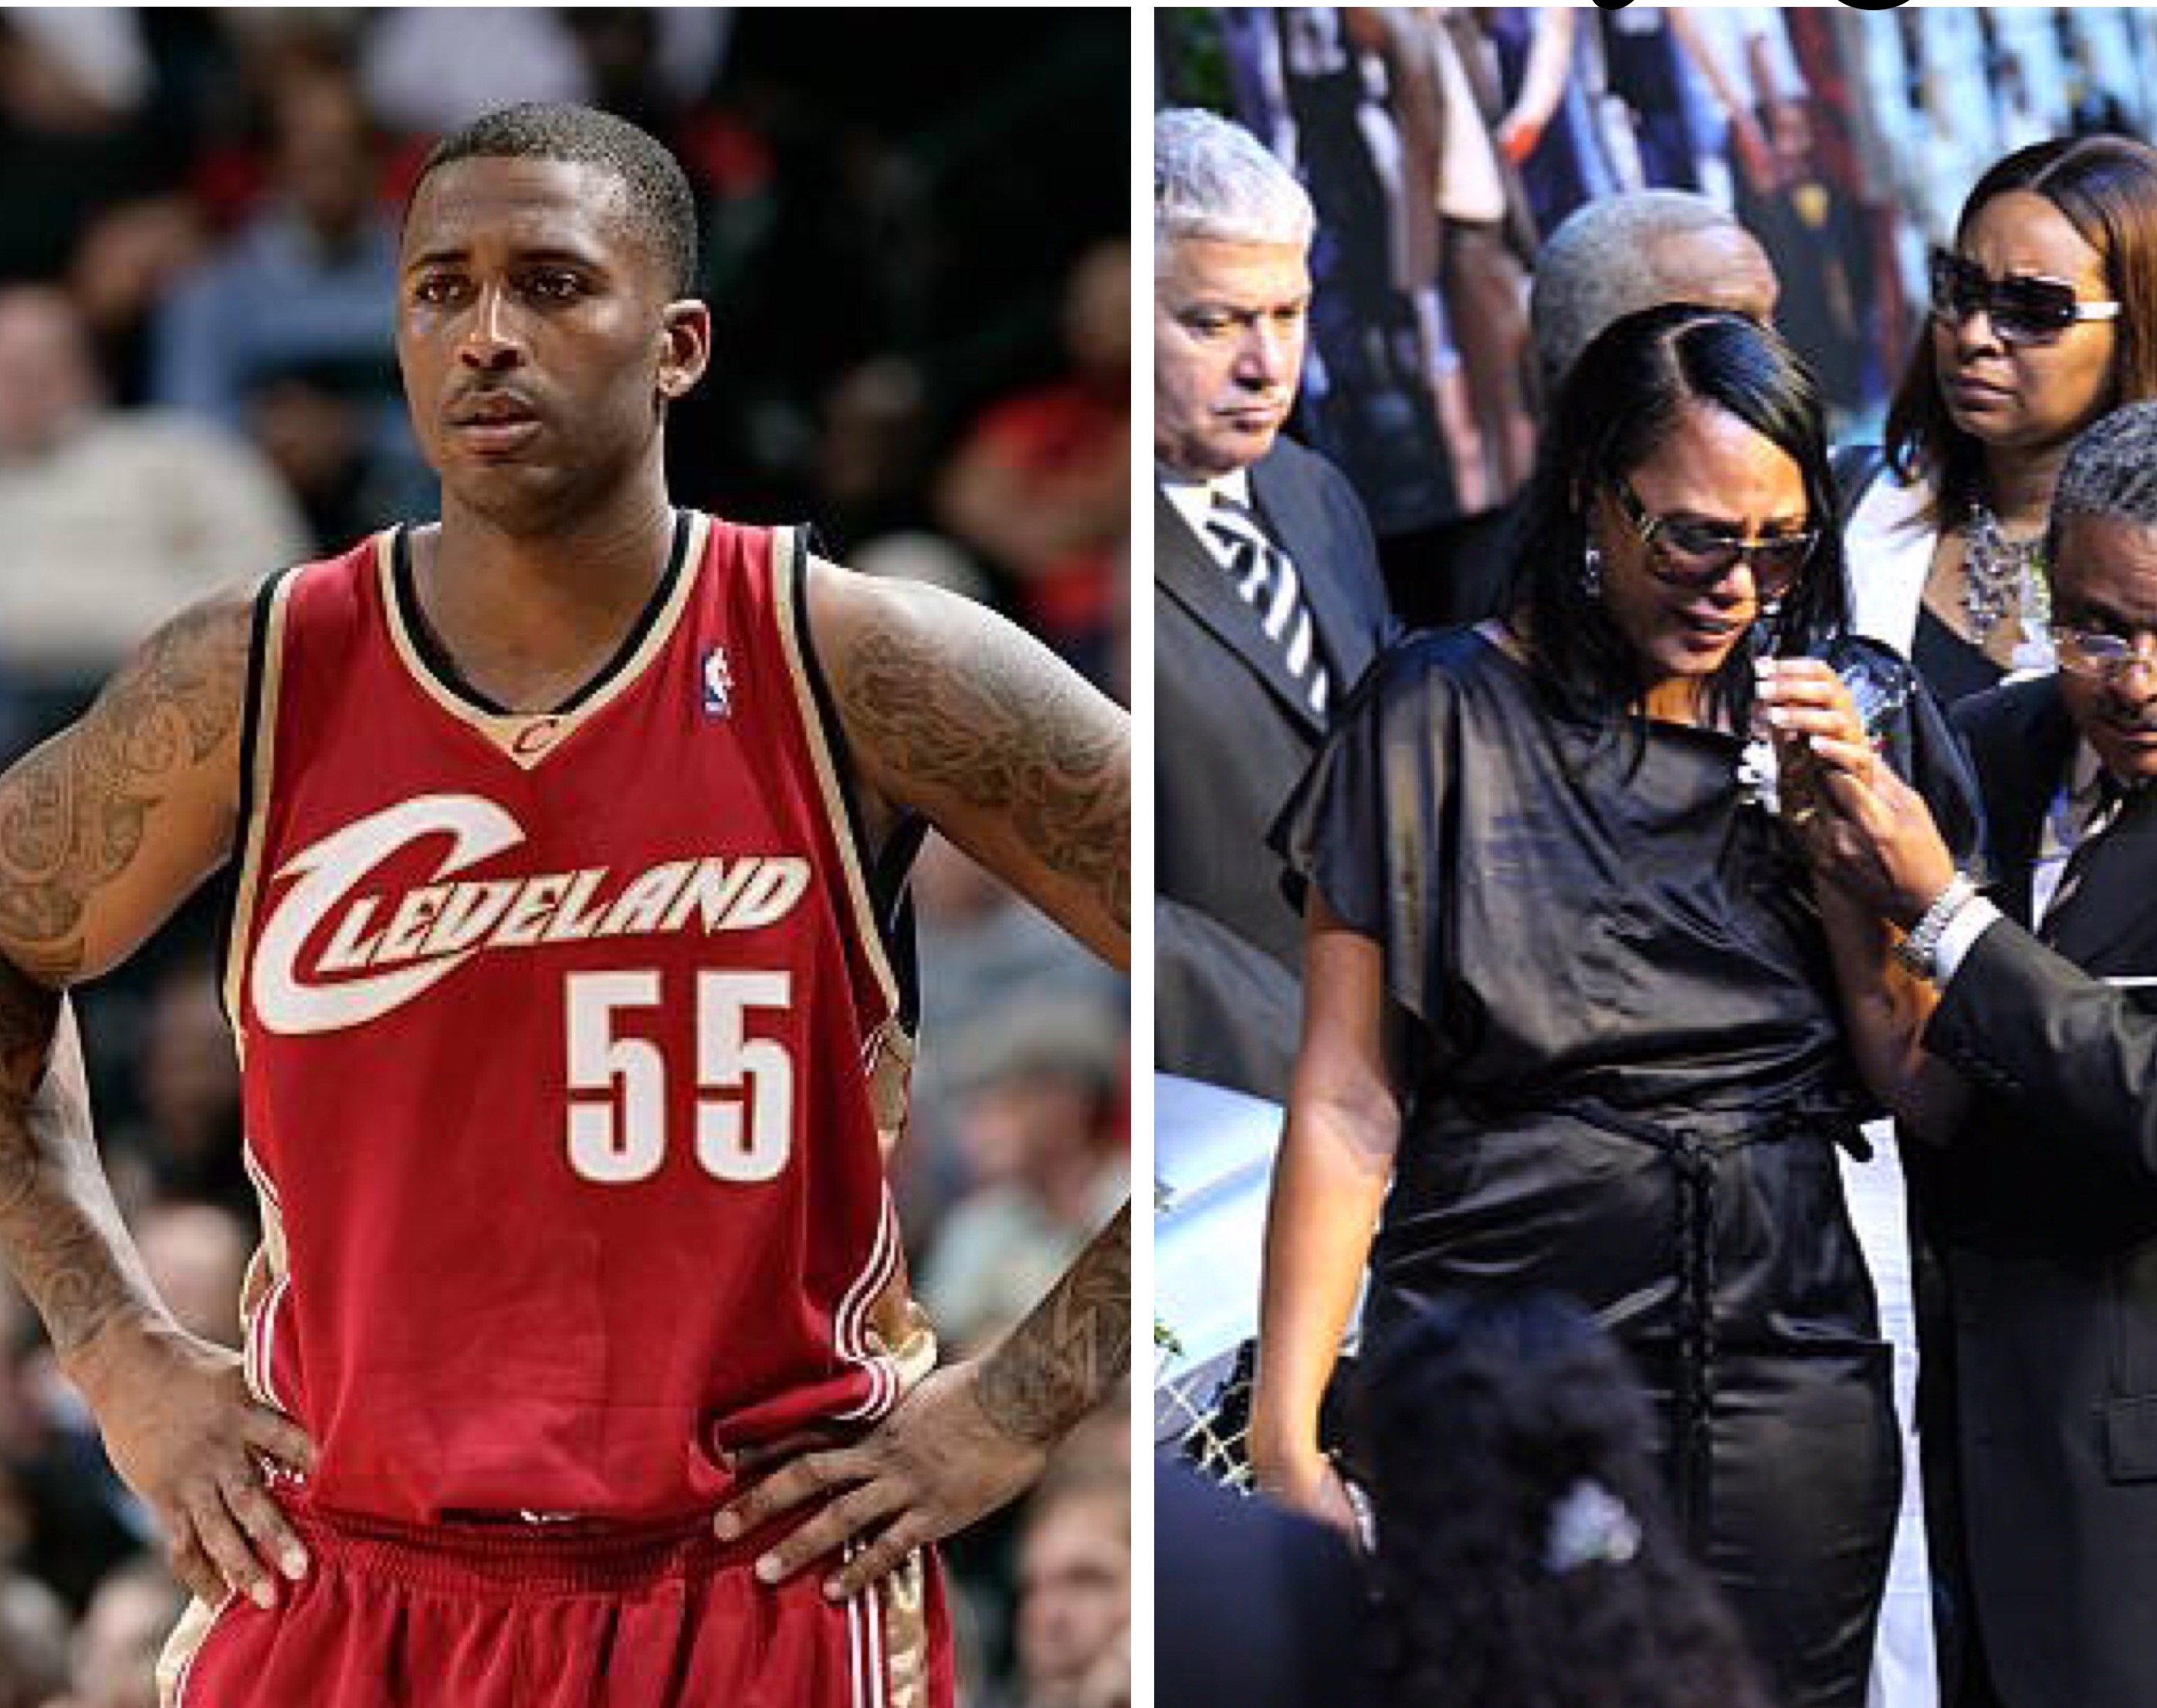 Ex-wife of NBA player Lorenzen Wright charged in his 2010 slaying - The Shade Room